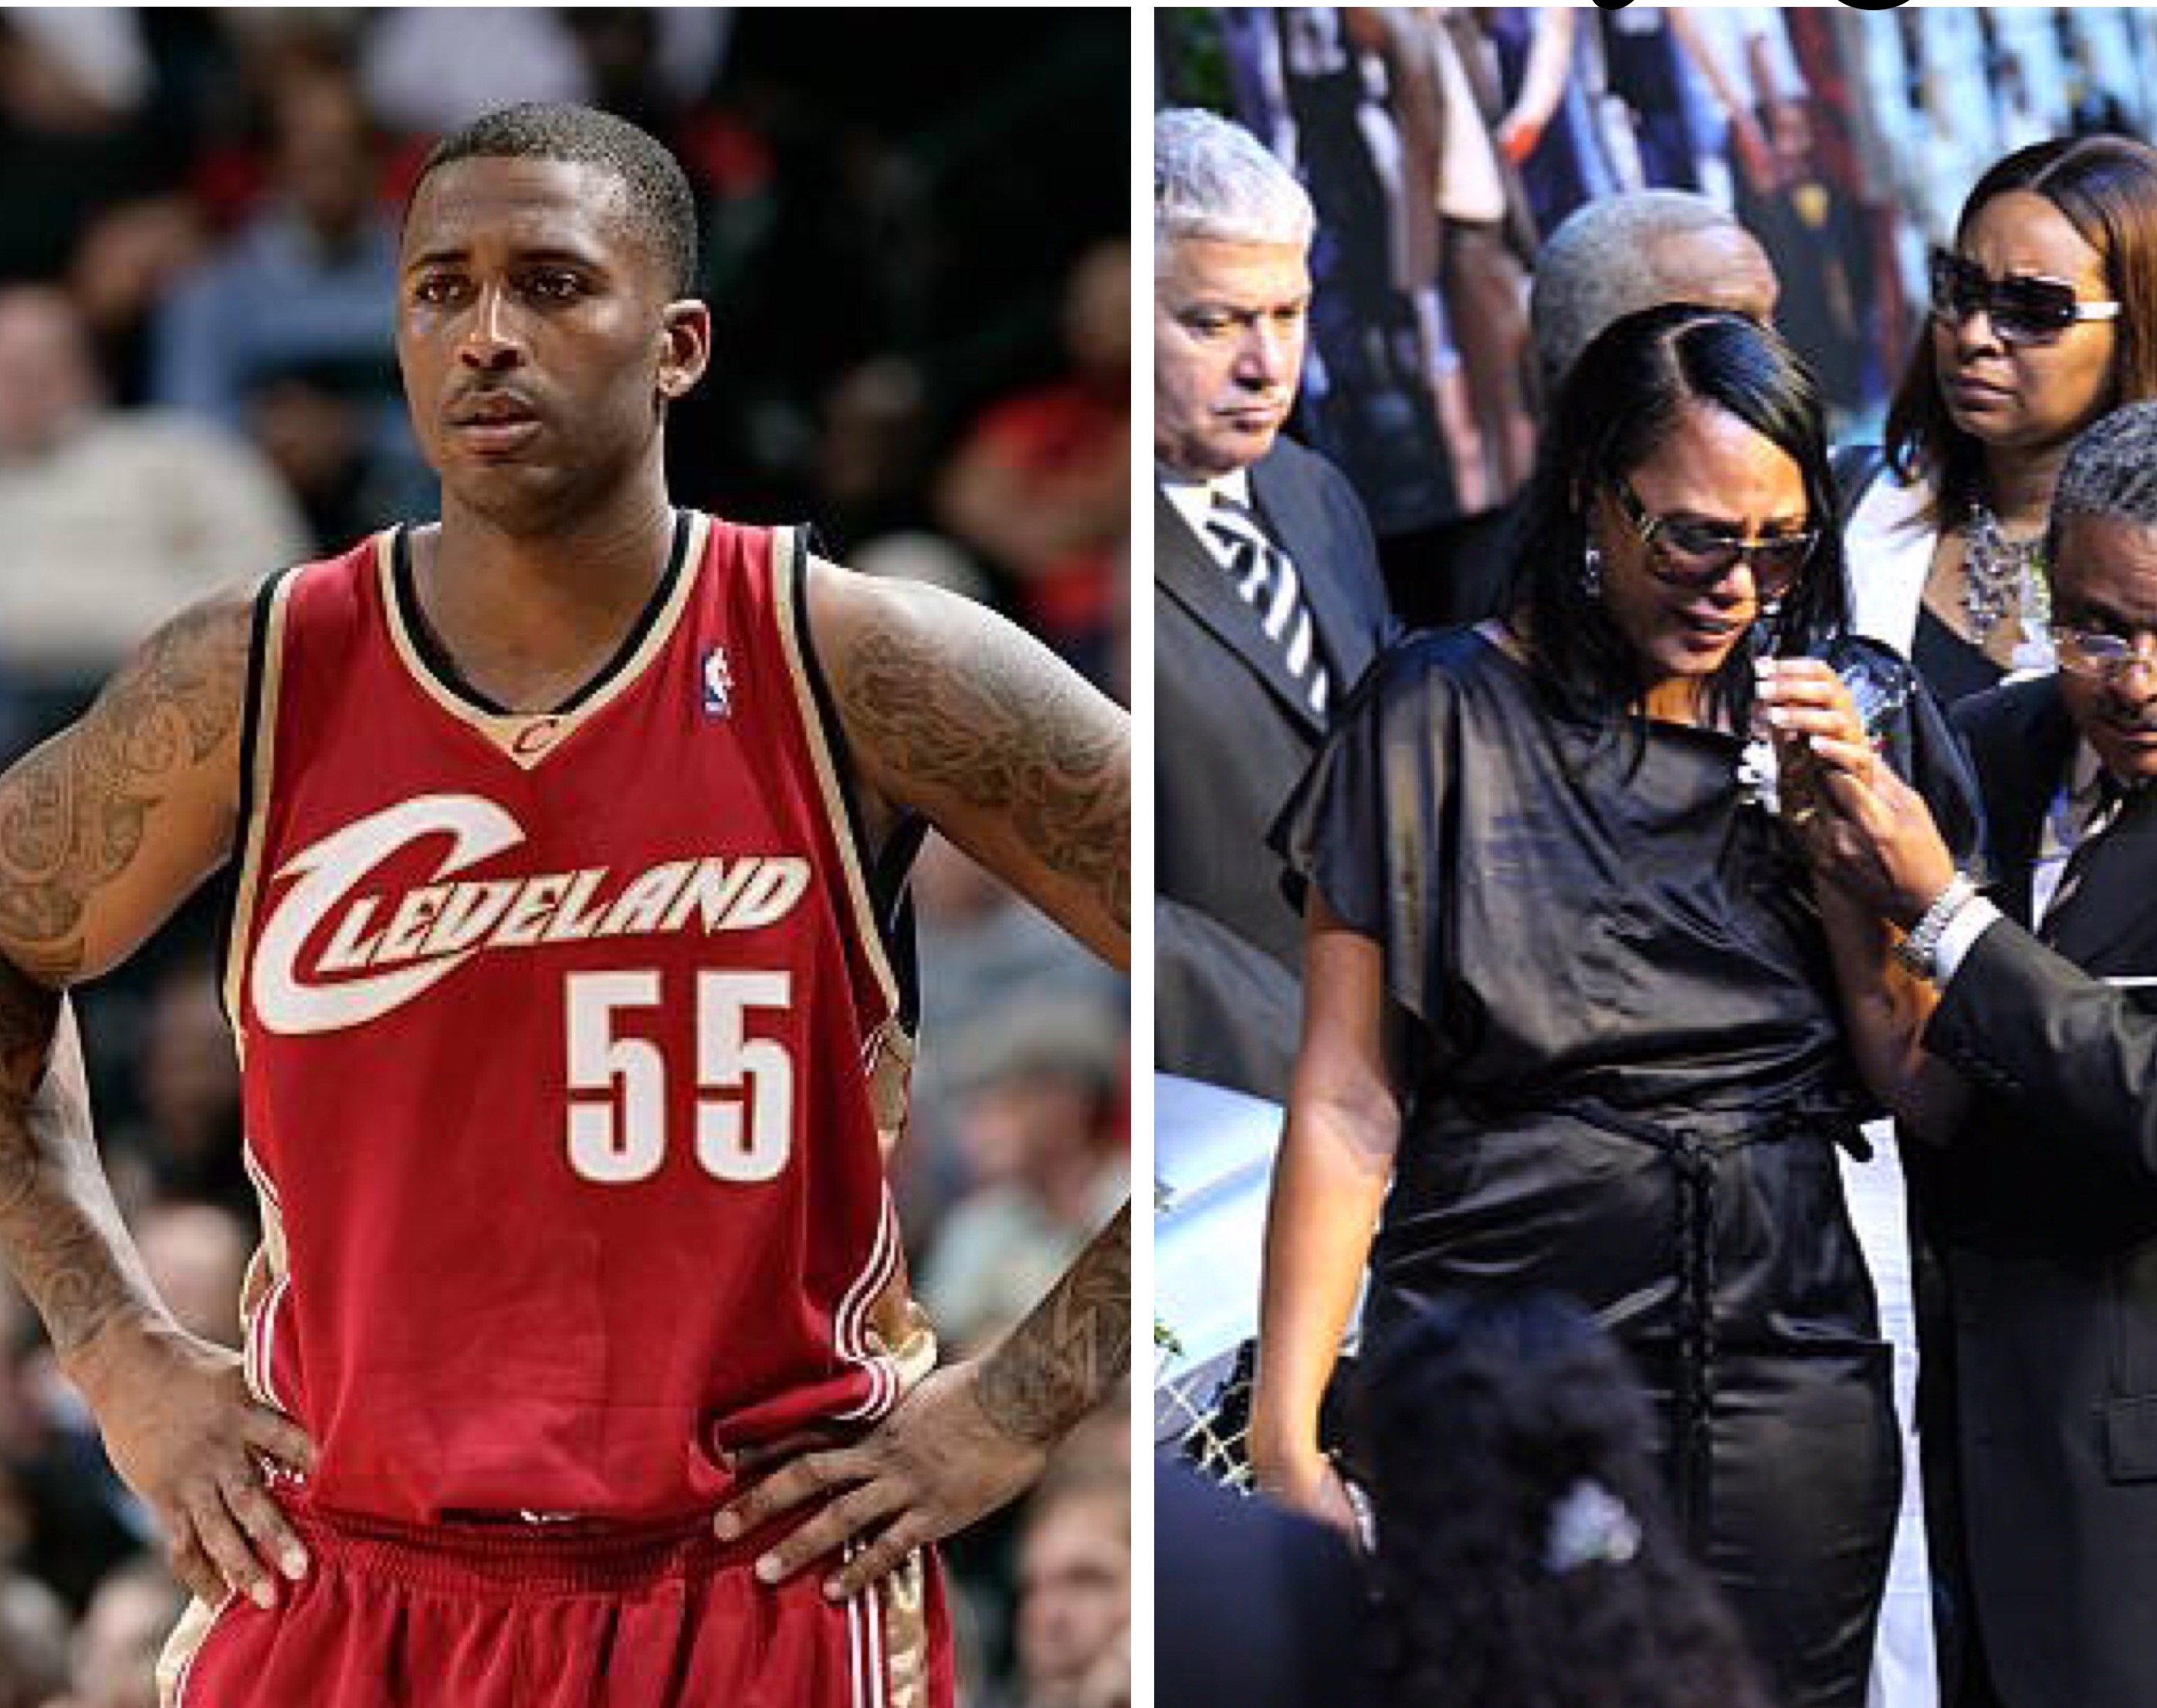 Ex-wife of NBA player Lorenzen Wright charged in his 2010 slaying - The Shade Room